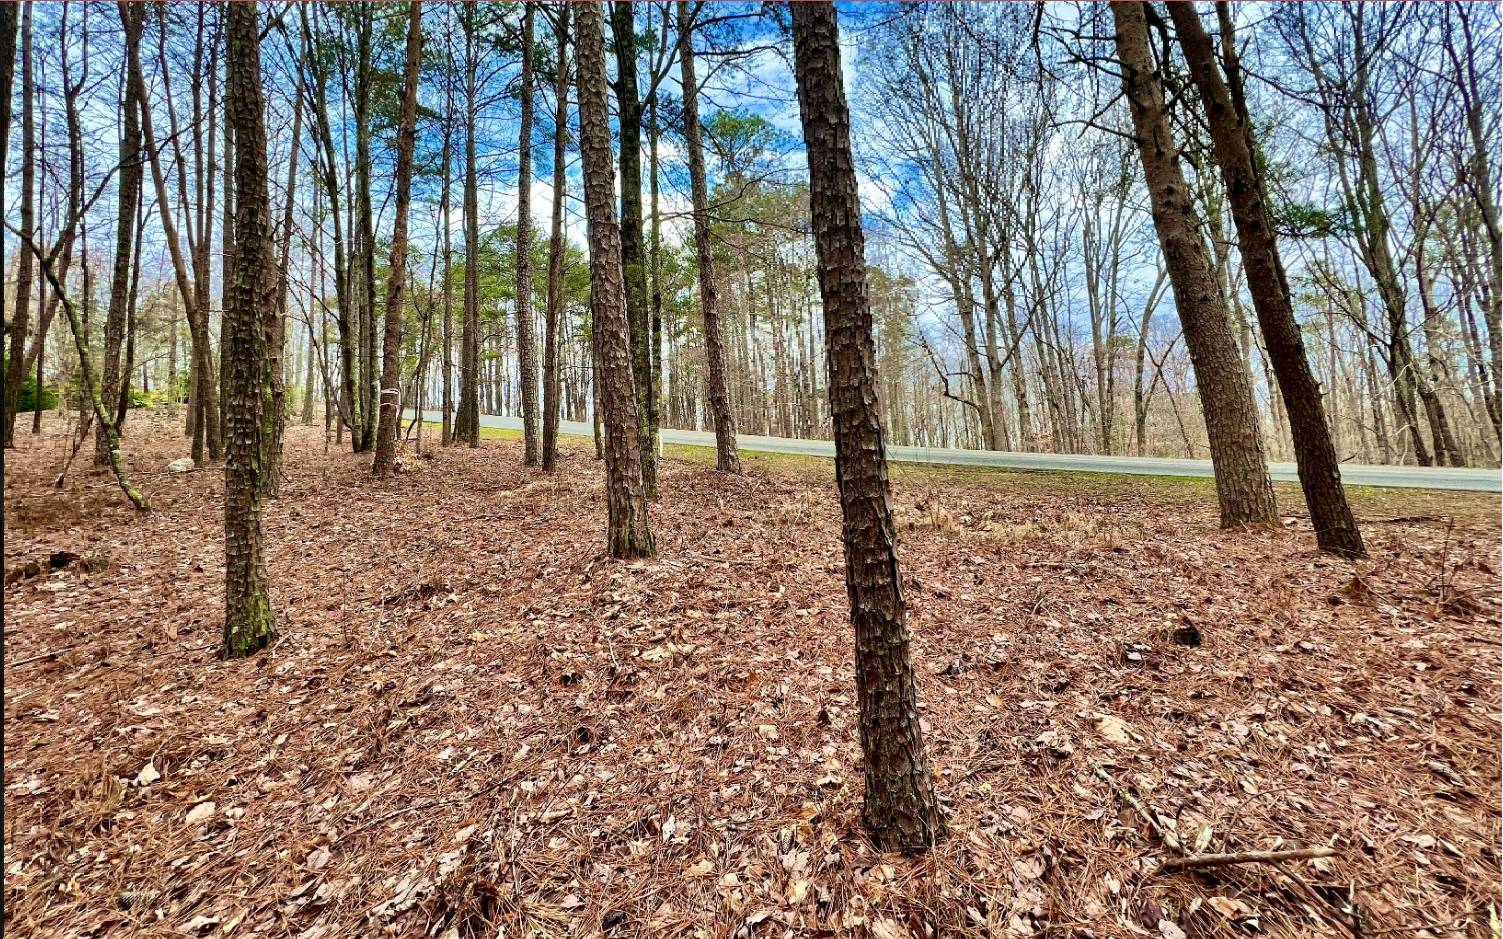 Beautiful level 1.01 acre lot on a paved road Only a 1 mile drive to Carters Lake boat ramp so bring your boat! Rare level lot for the North Georgia Mountains so its a must see! Very desirable community with many beautiful new homes! Reasonable deed restrictions. Lot has mountain views and deer path! Community has all underground utilities, paved roads, county water, community pavilion, walking trails along Harris Creek, and a playground. Located 10 minutes from Ellijay and close to the swimming beach, hiking trails, picnic & camping facilities, and wineries. Lot is not located in the gate.